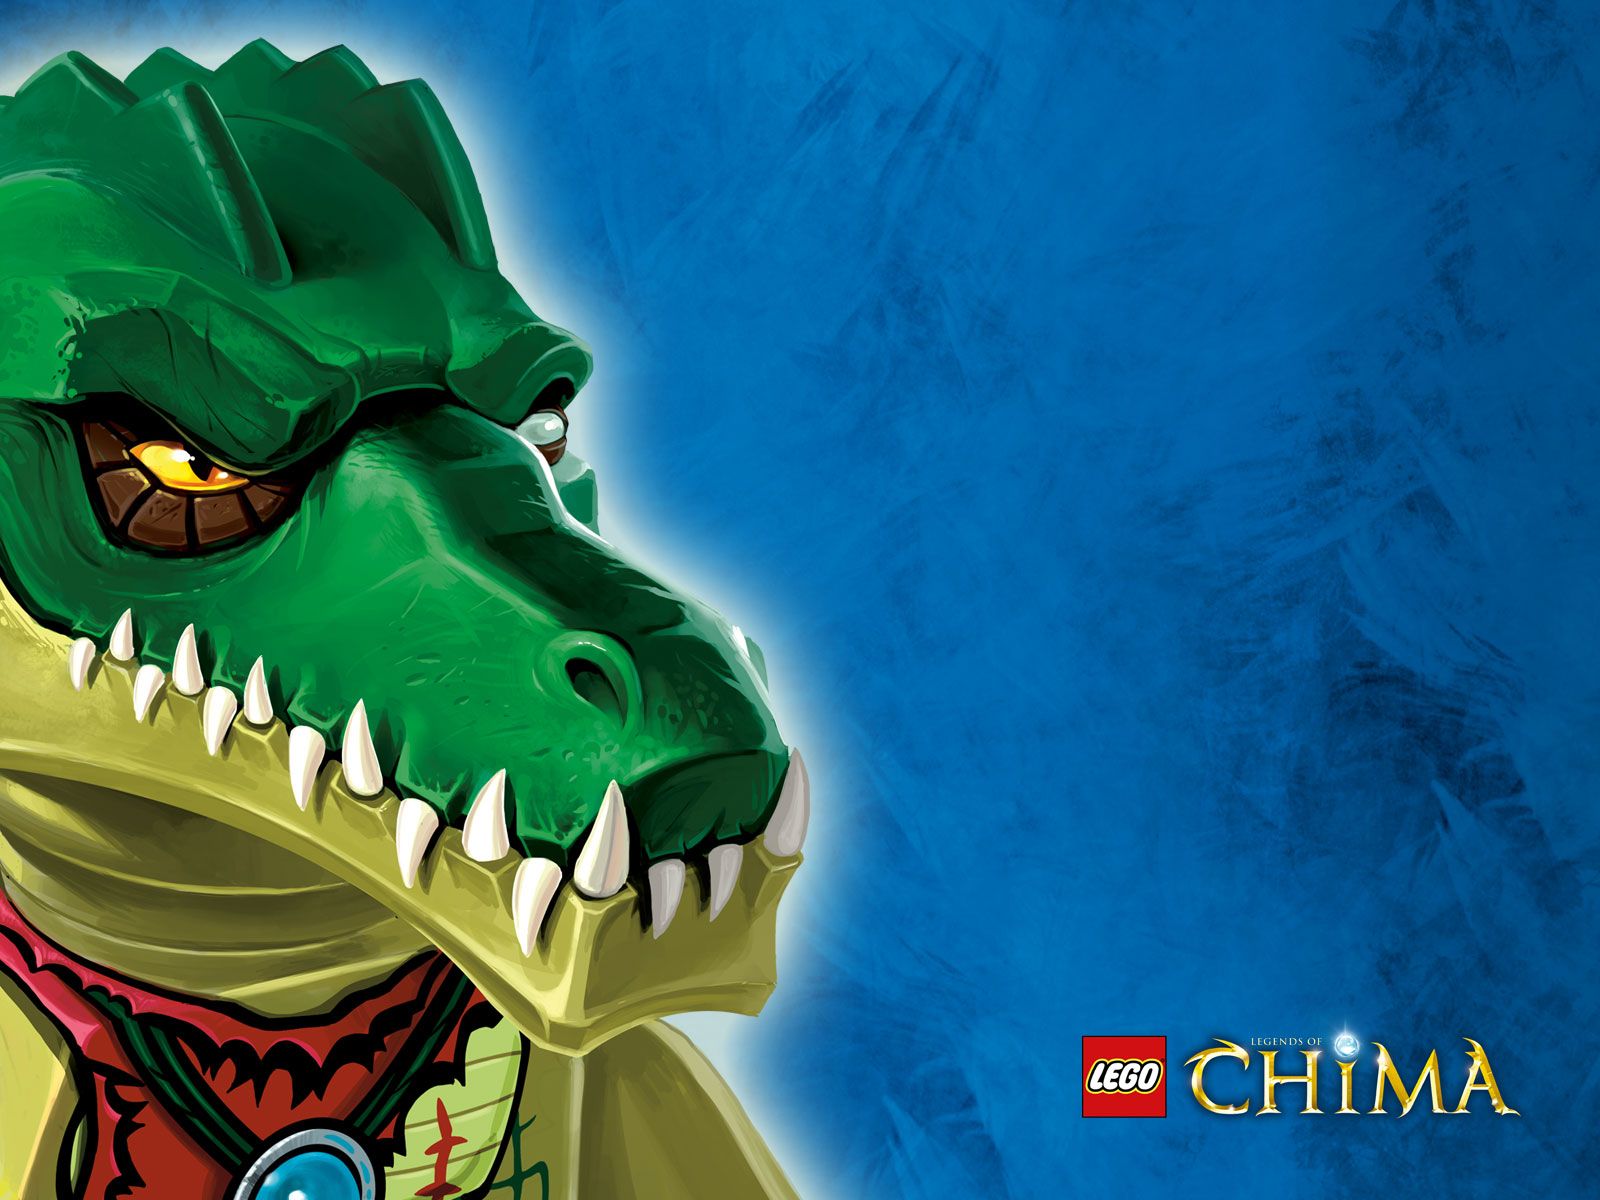 Lego Chima Wallpaper With Image